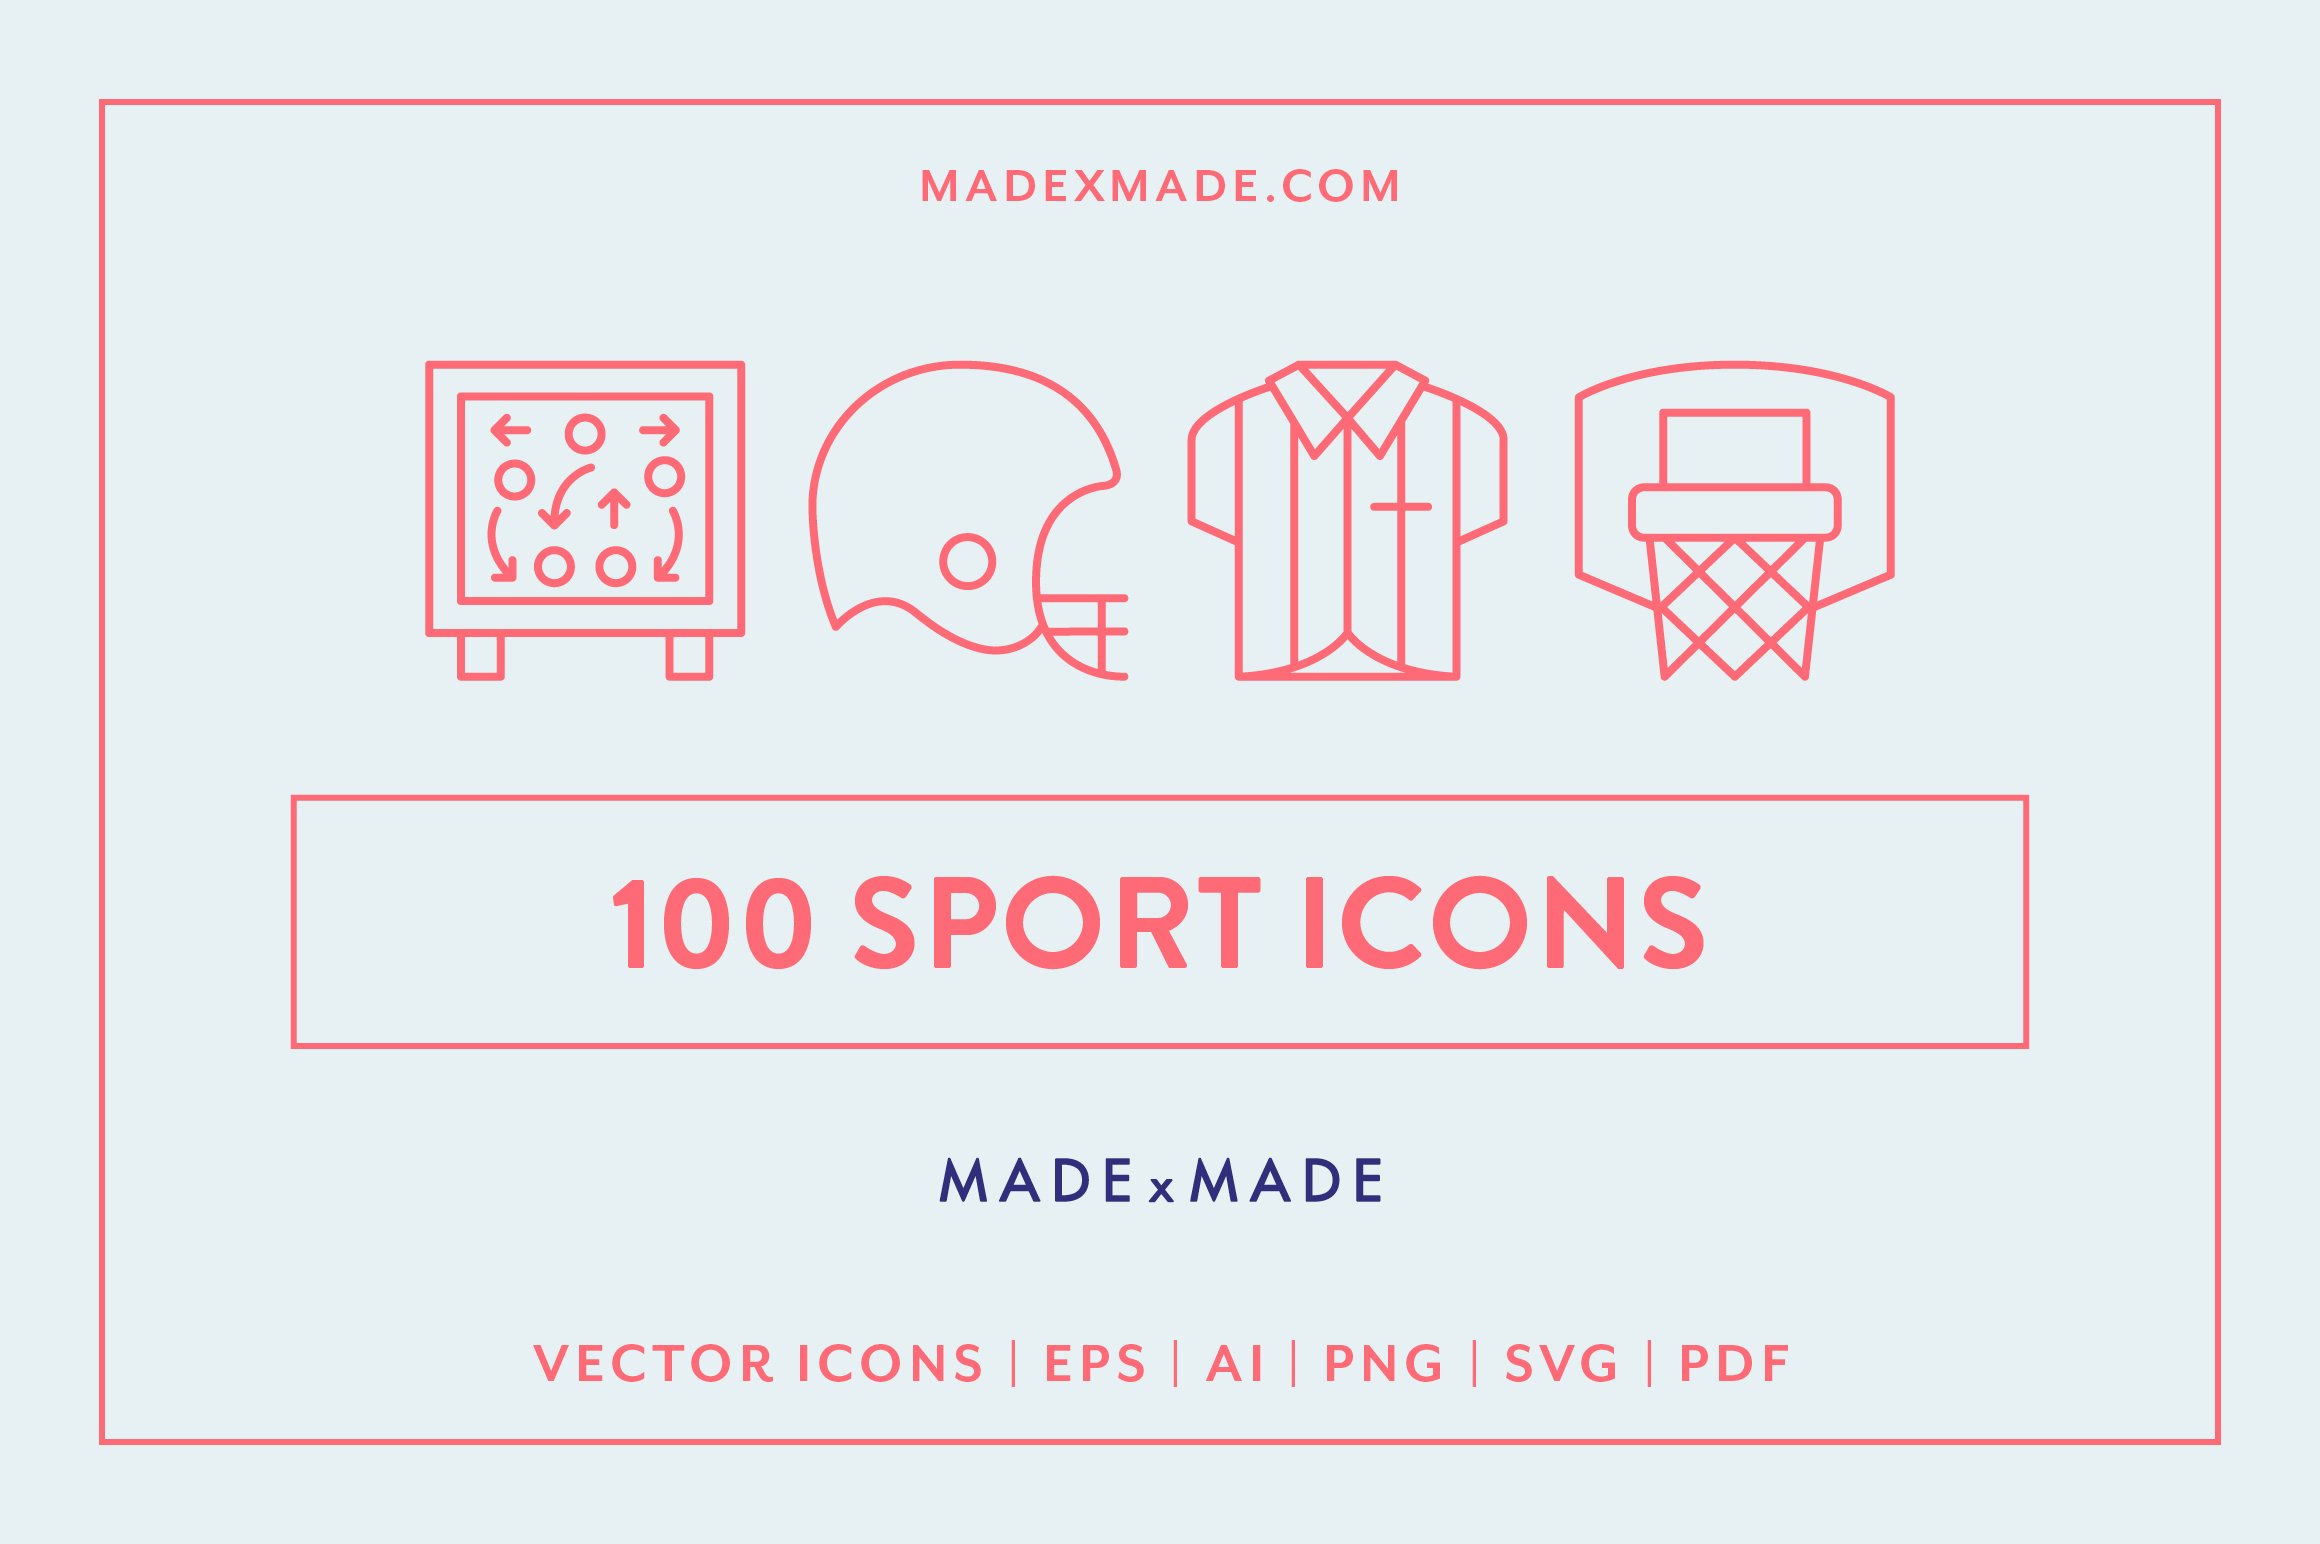 Sport Line Icons cover image.